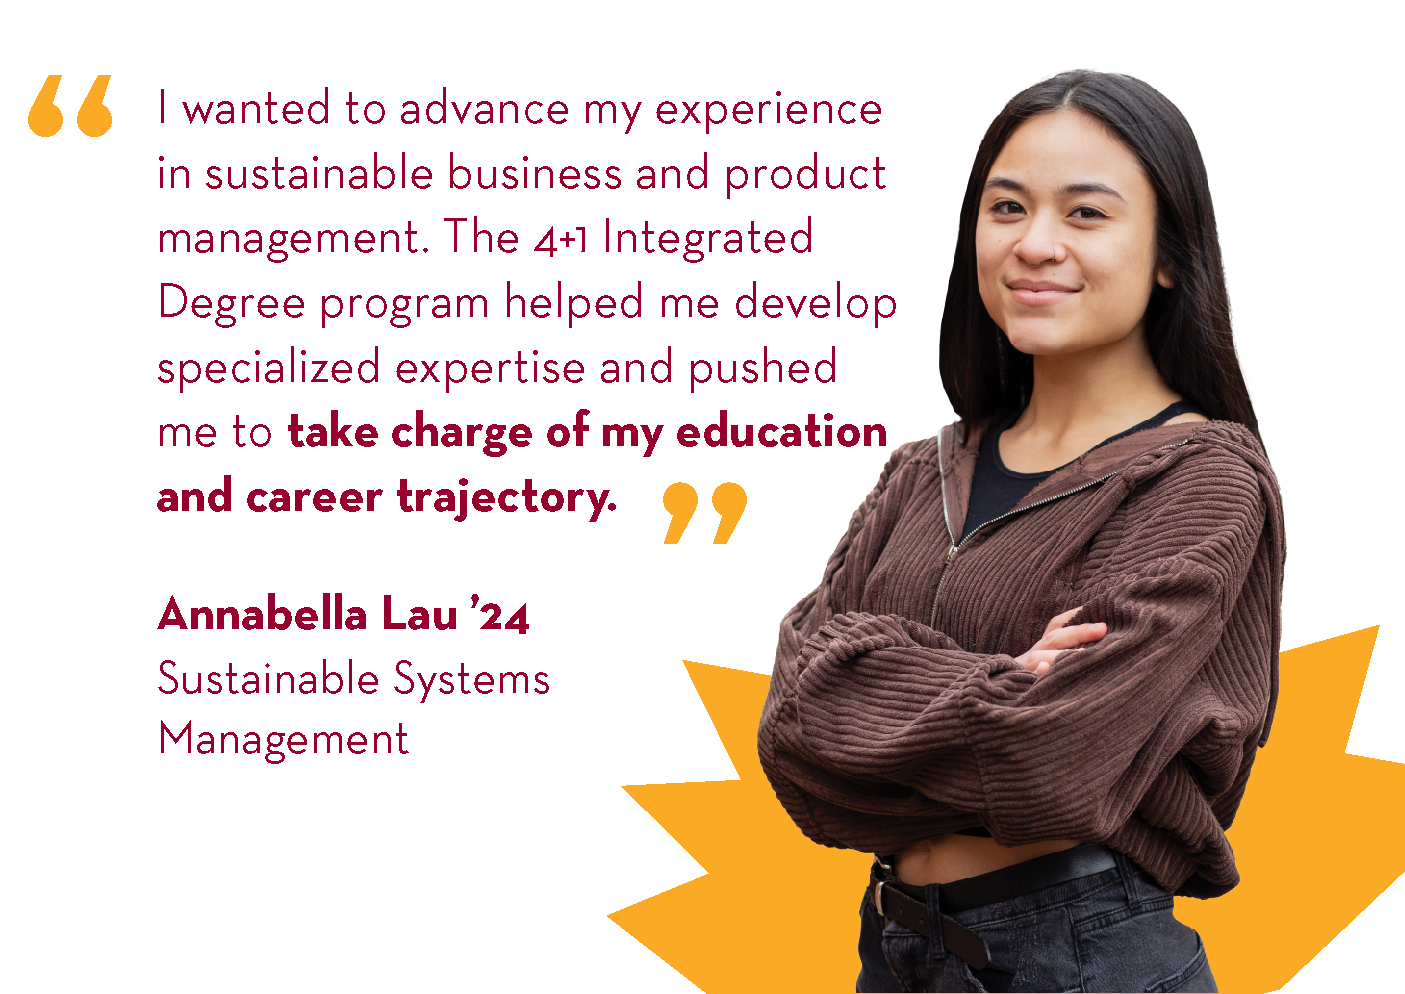 Annabella Lau photo and quote about IDP.